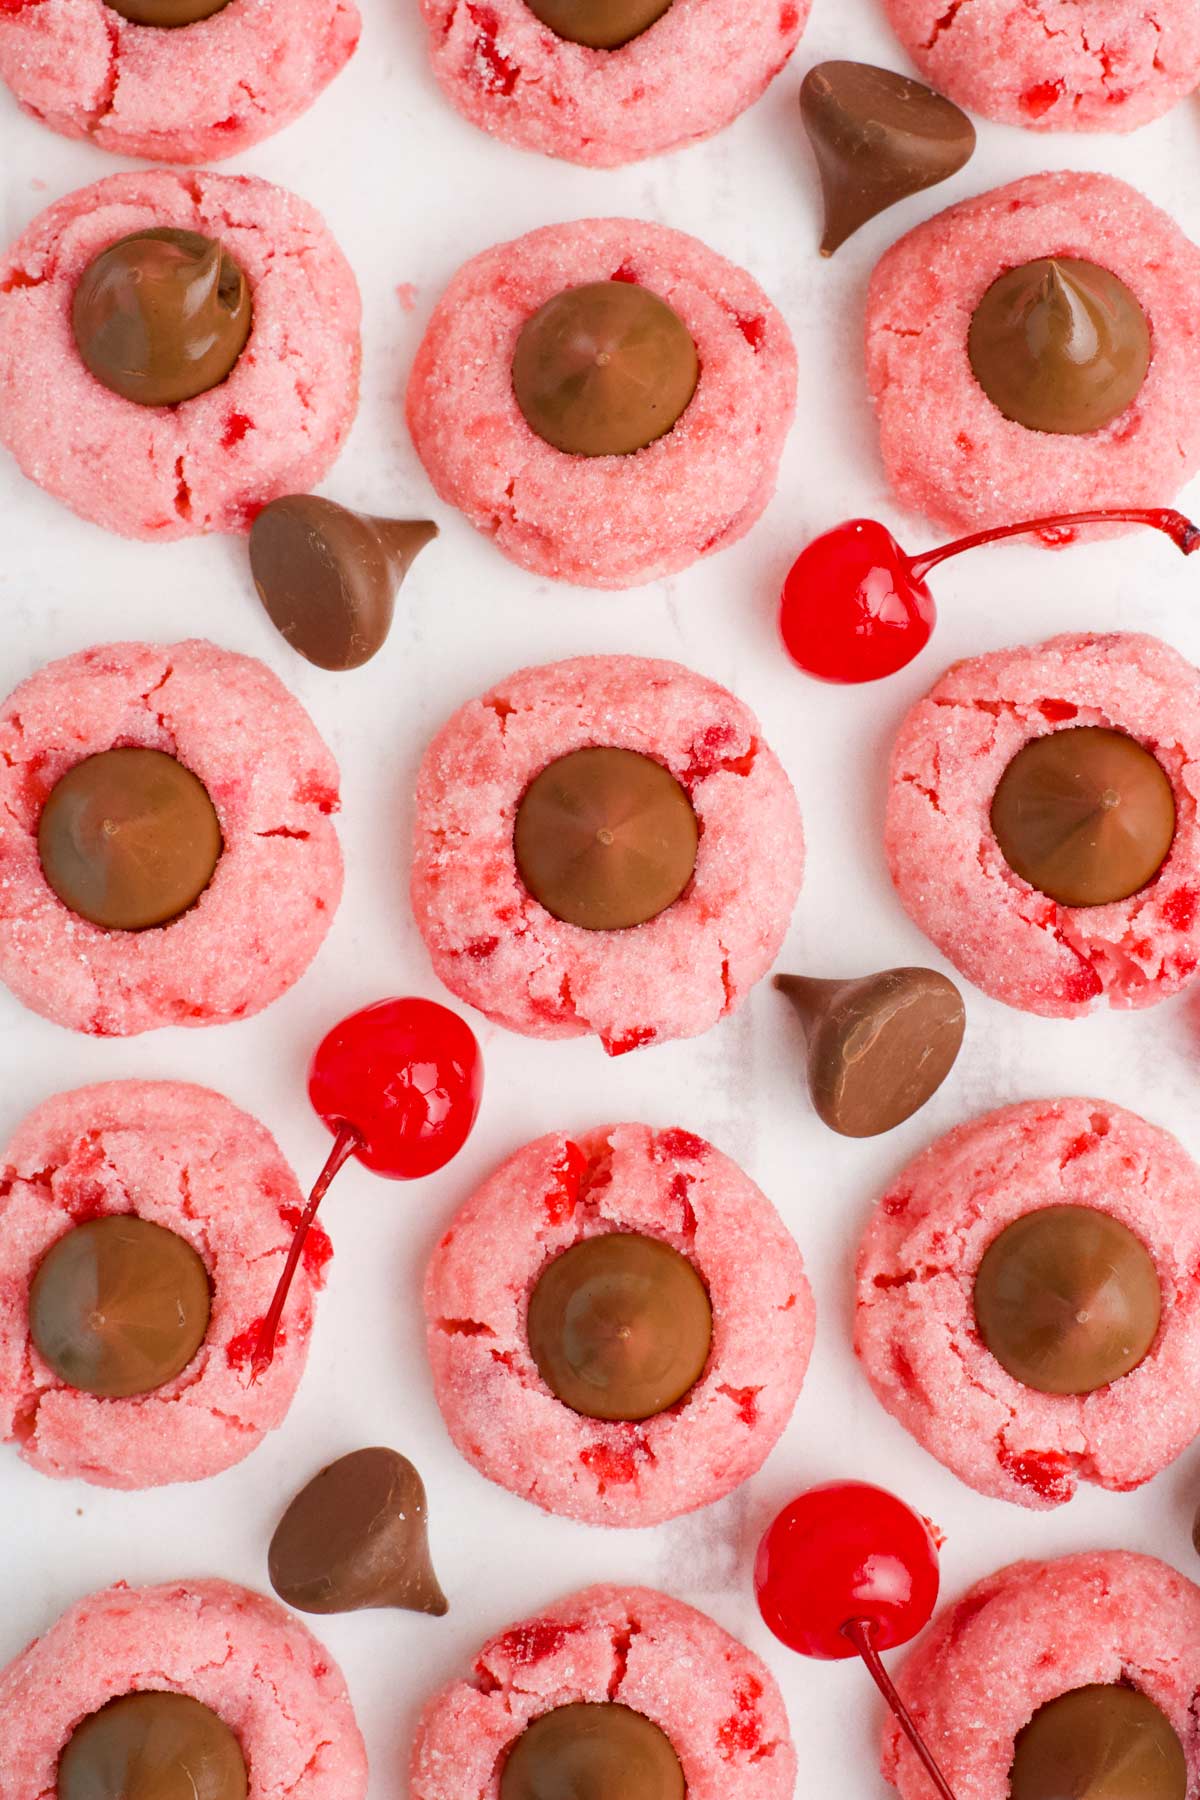 Overhead image of cherry blossom cookies on a white surface with cherries and kisses around them.